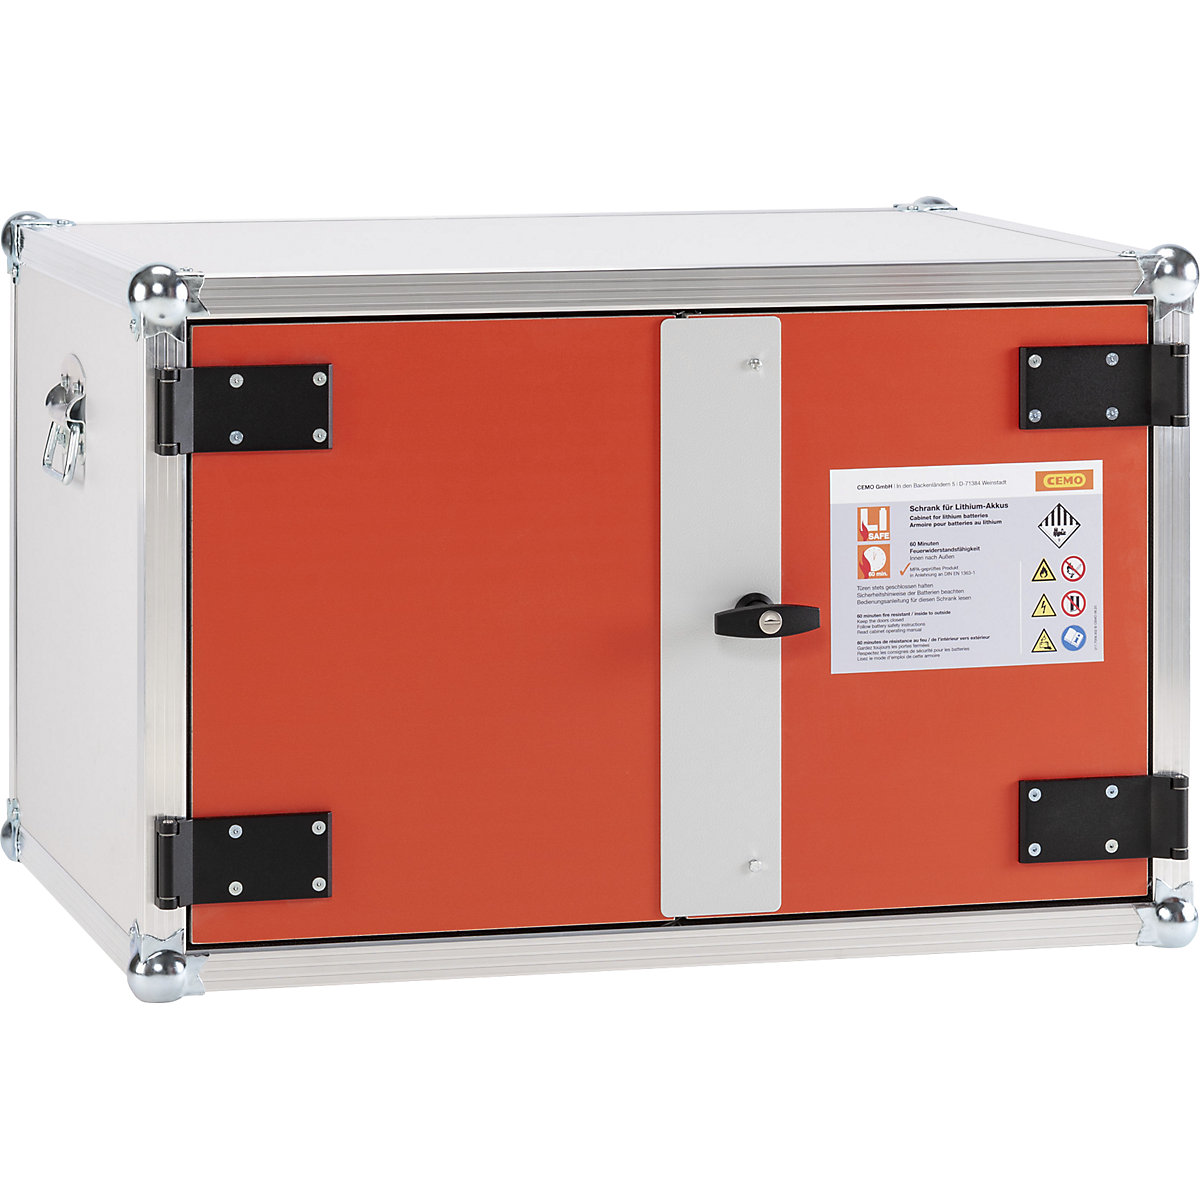 FR 60 safety storage cupboard for rechargeable batteries - CEMO